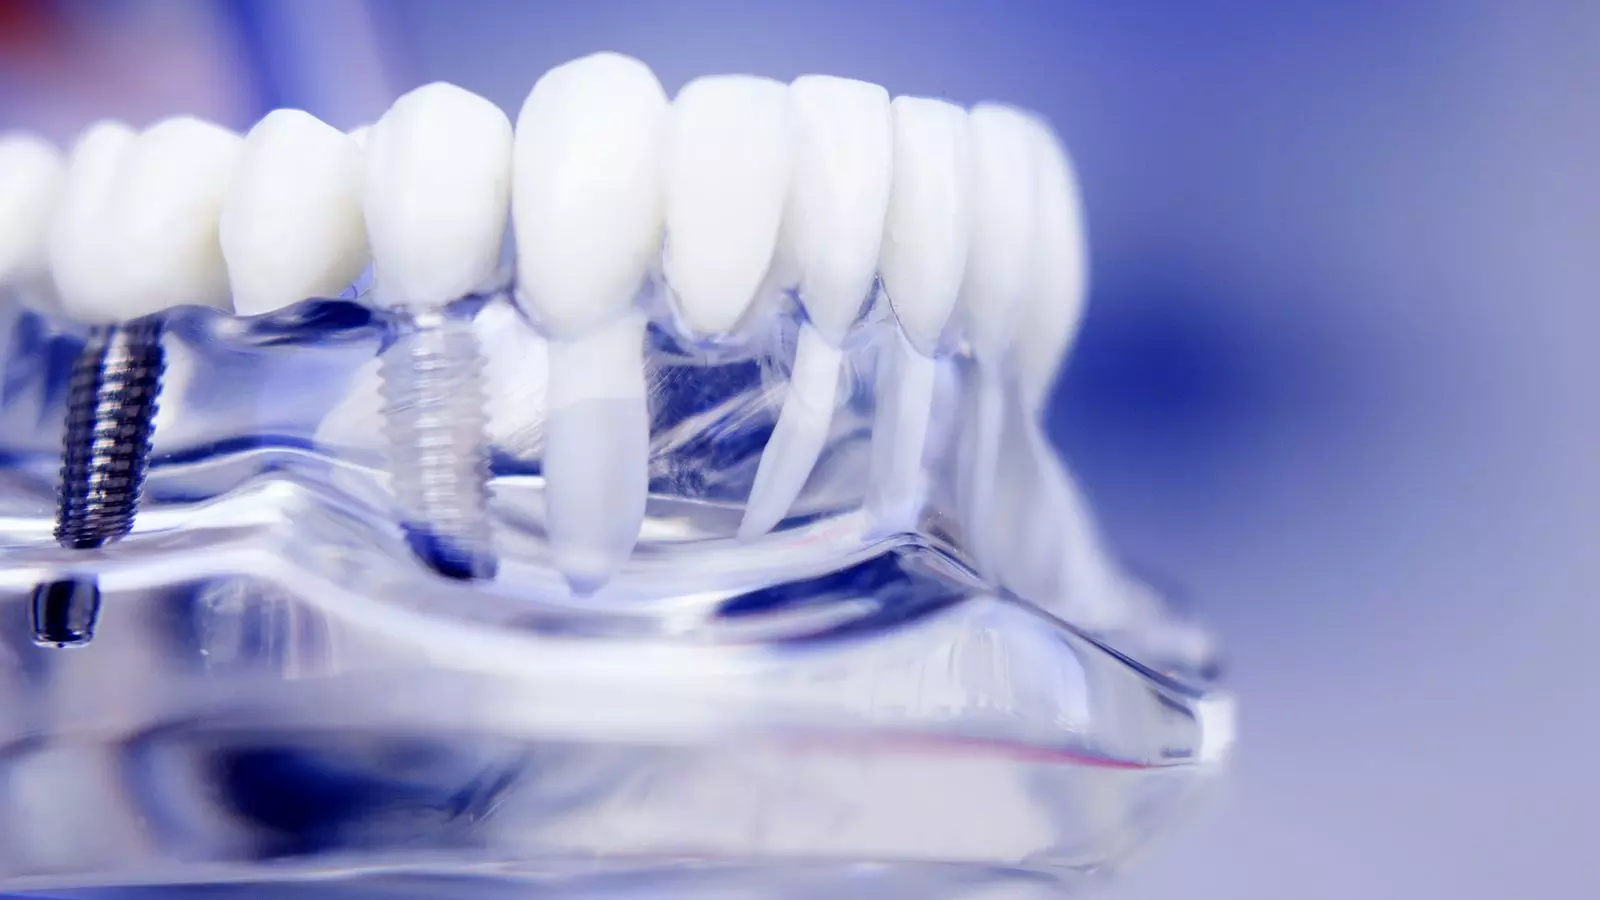 Short-term use of analgesics sufficient after dental implant surgery: Study